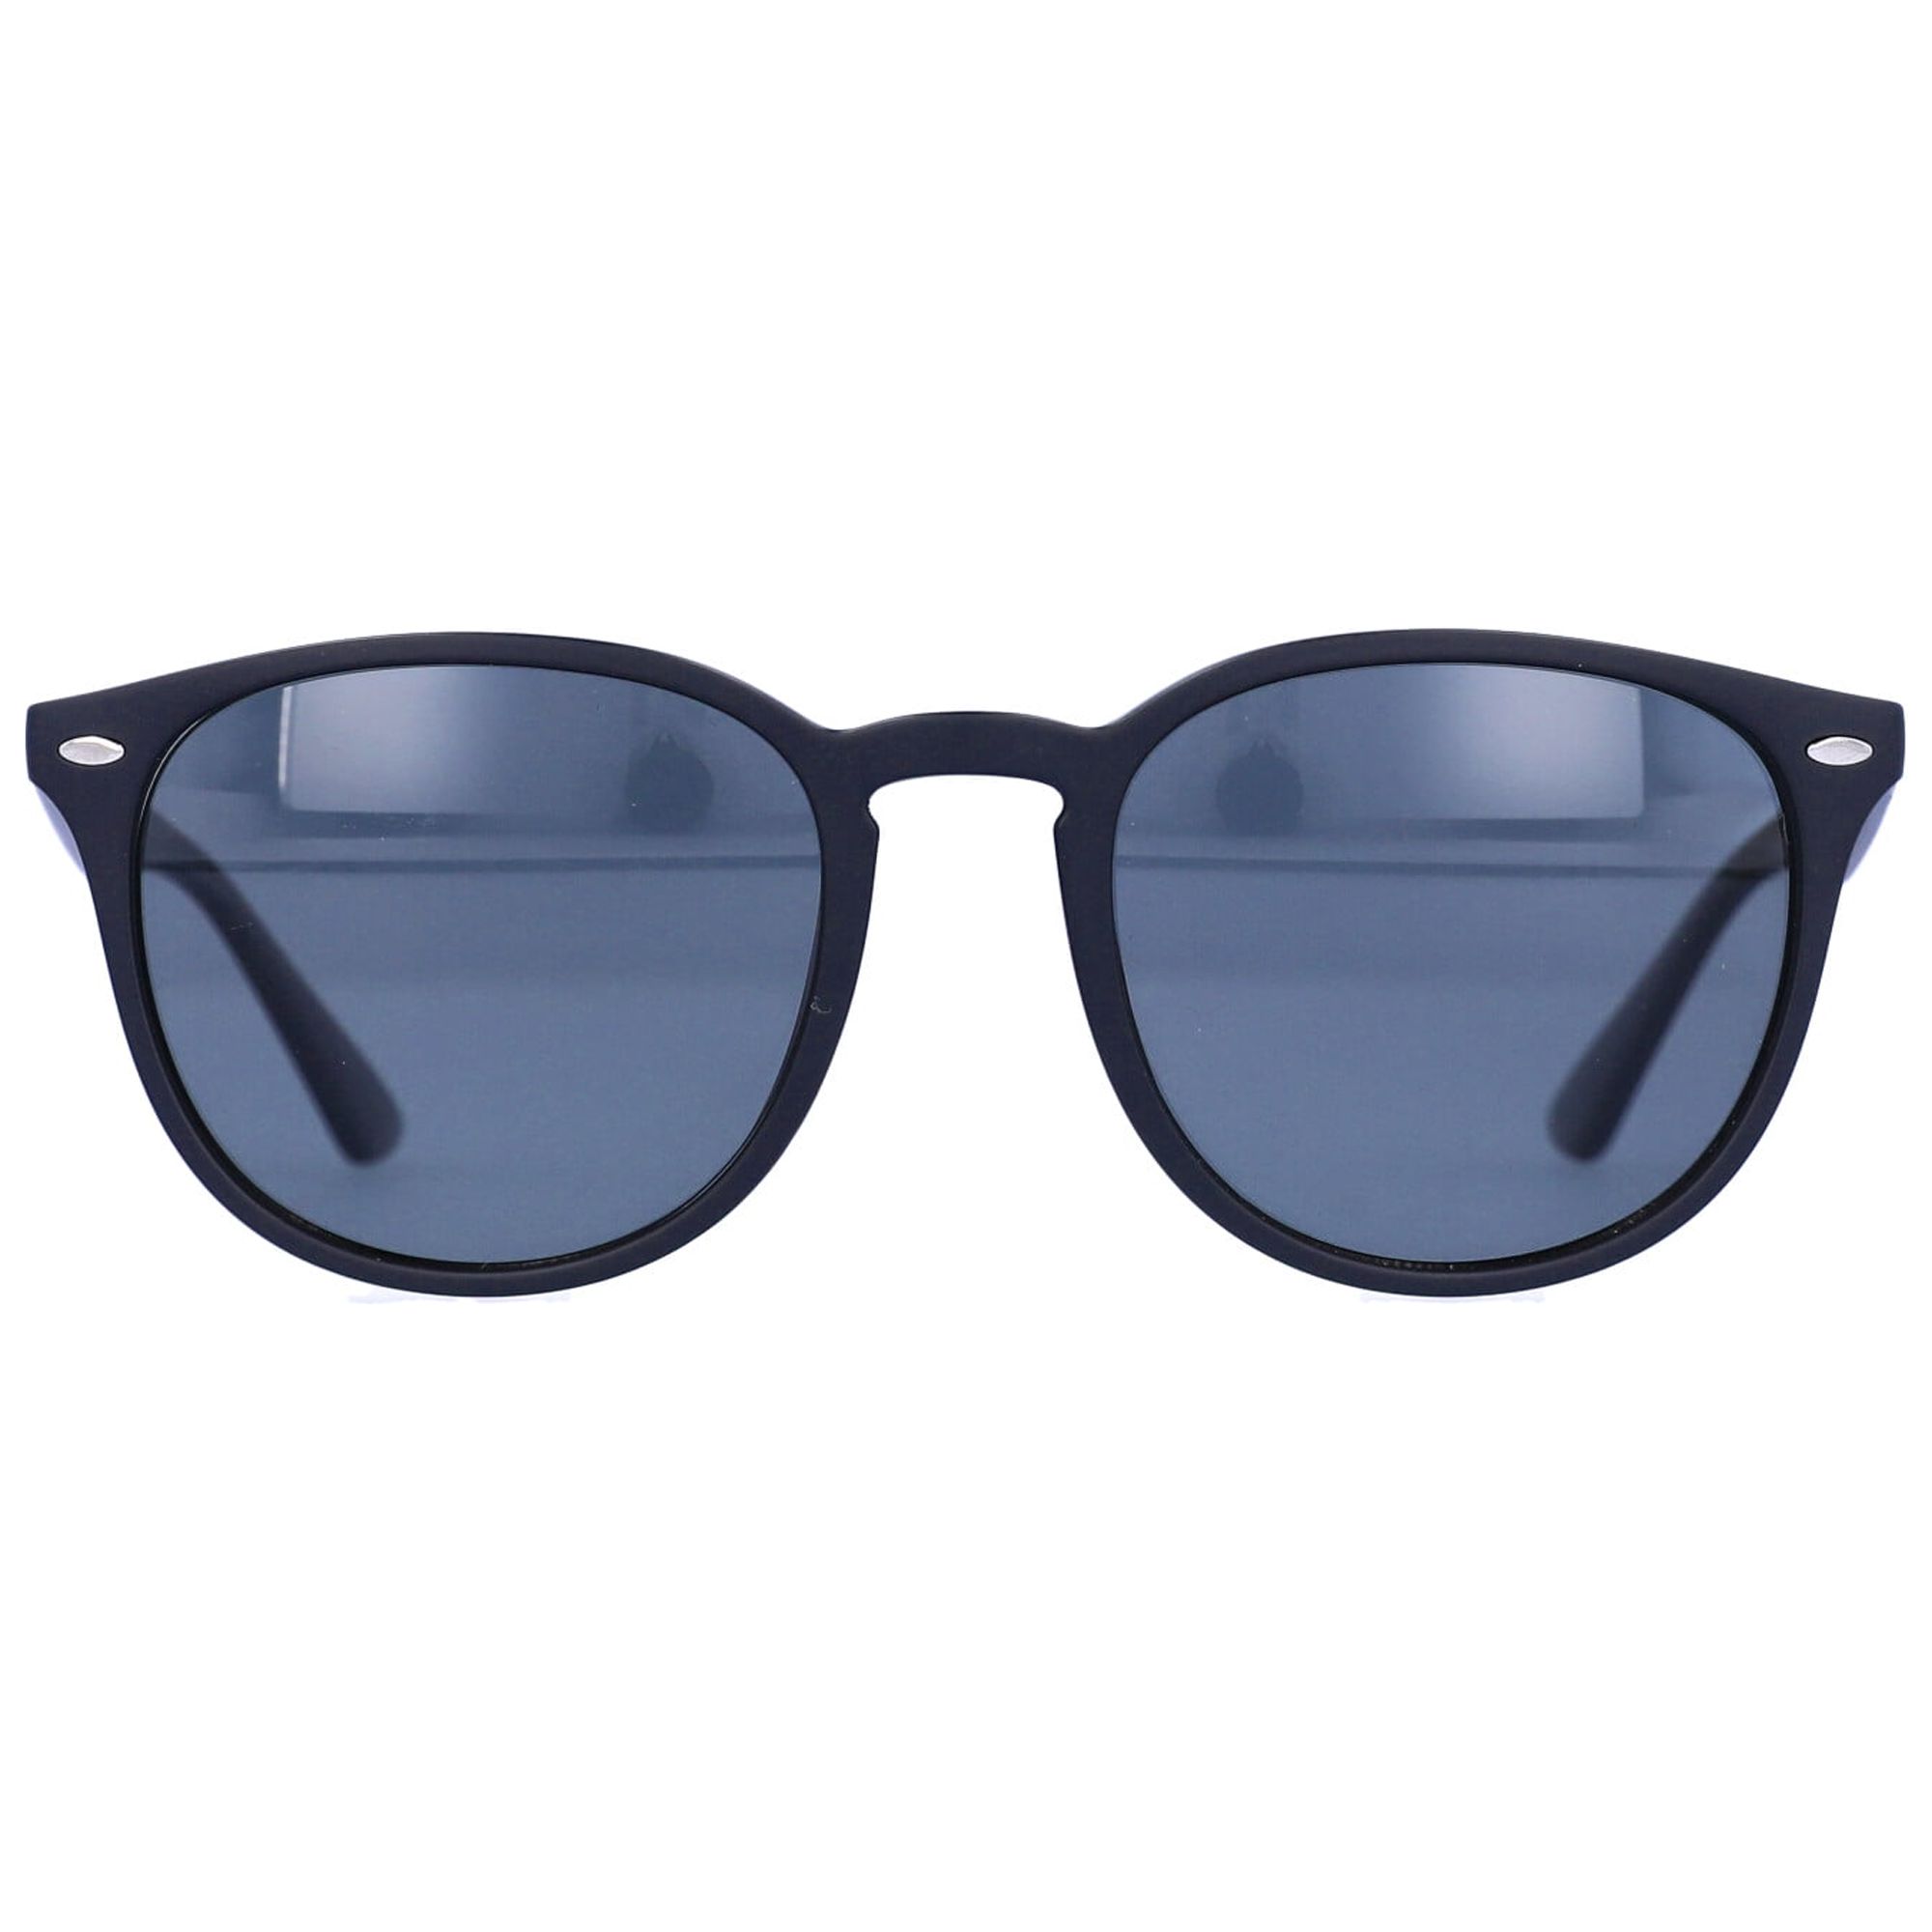 Hard Candy Womens Rx'able Sunglasses, Hs20, Matte Black, 52-20-145, with Case - image 5 of 20